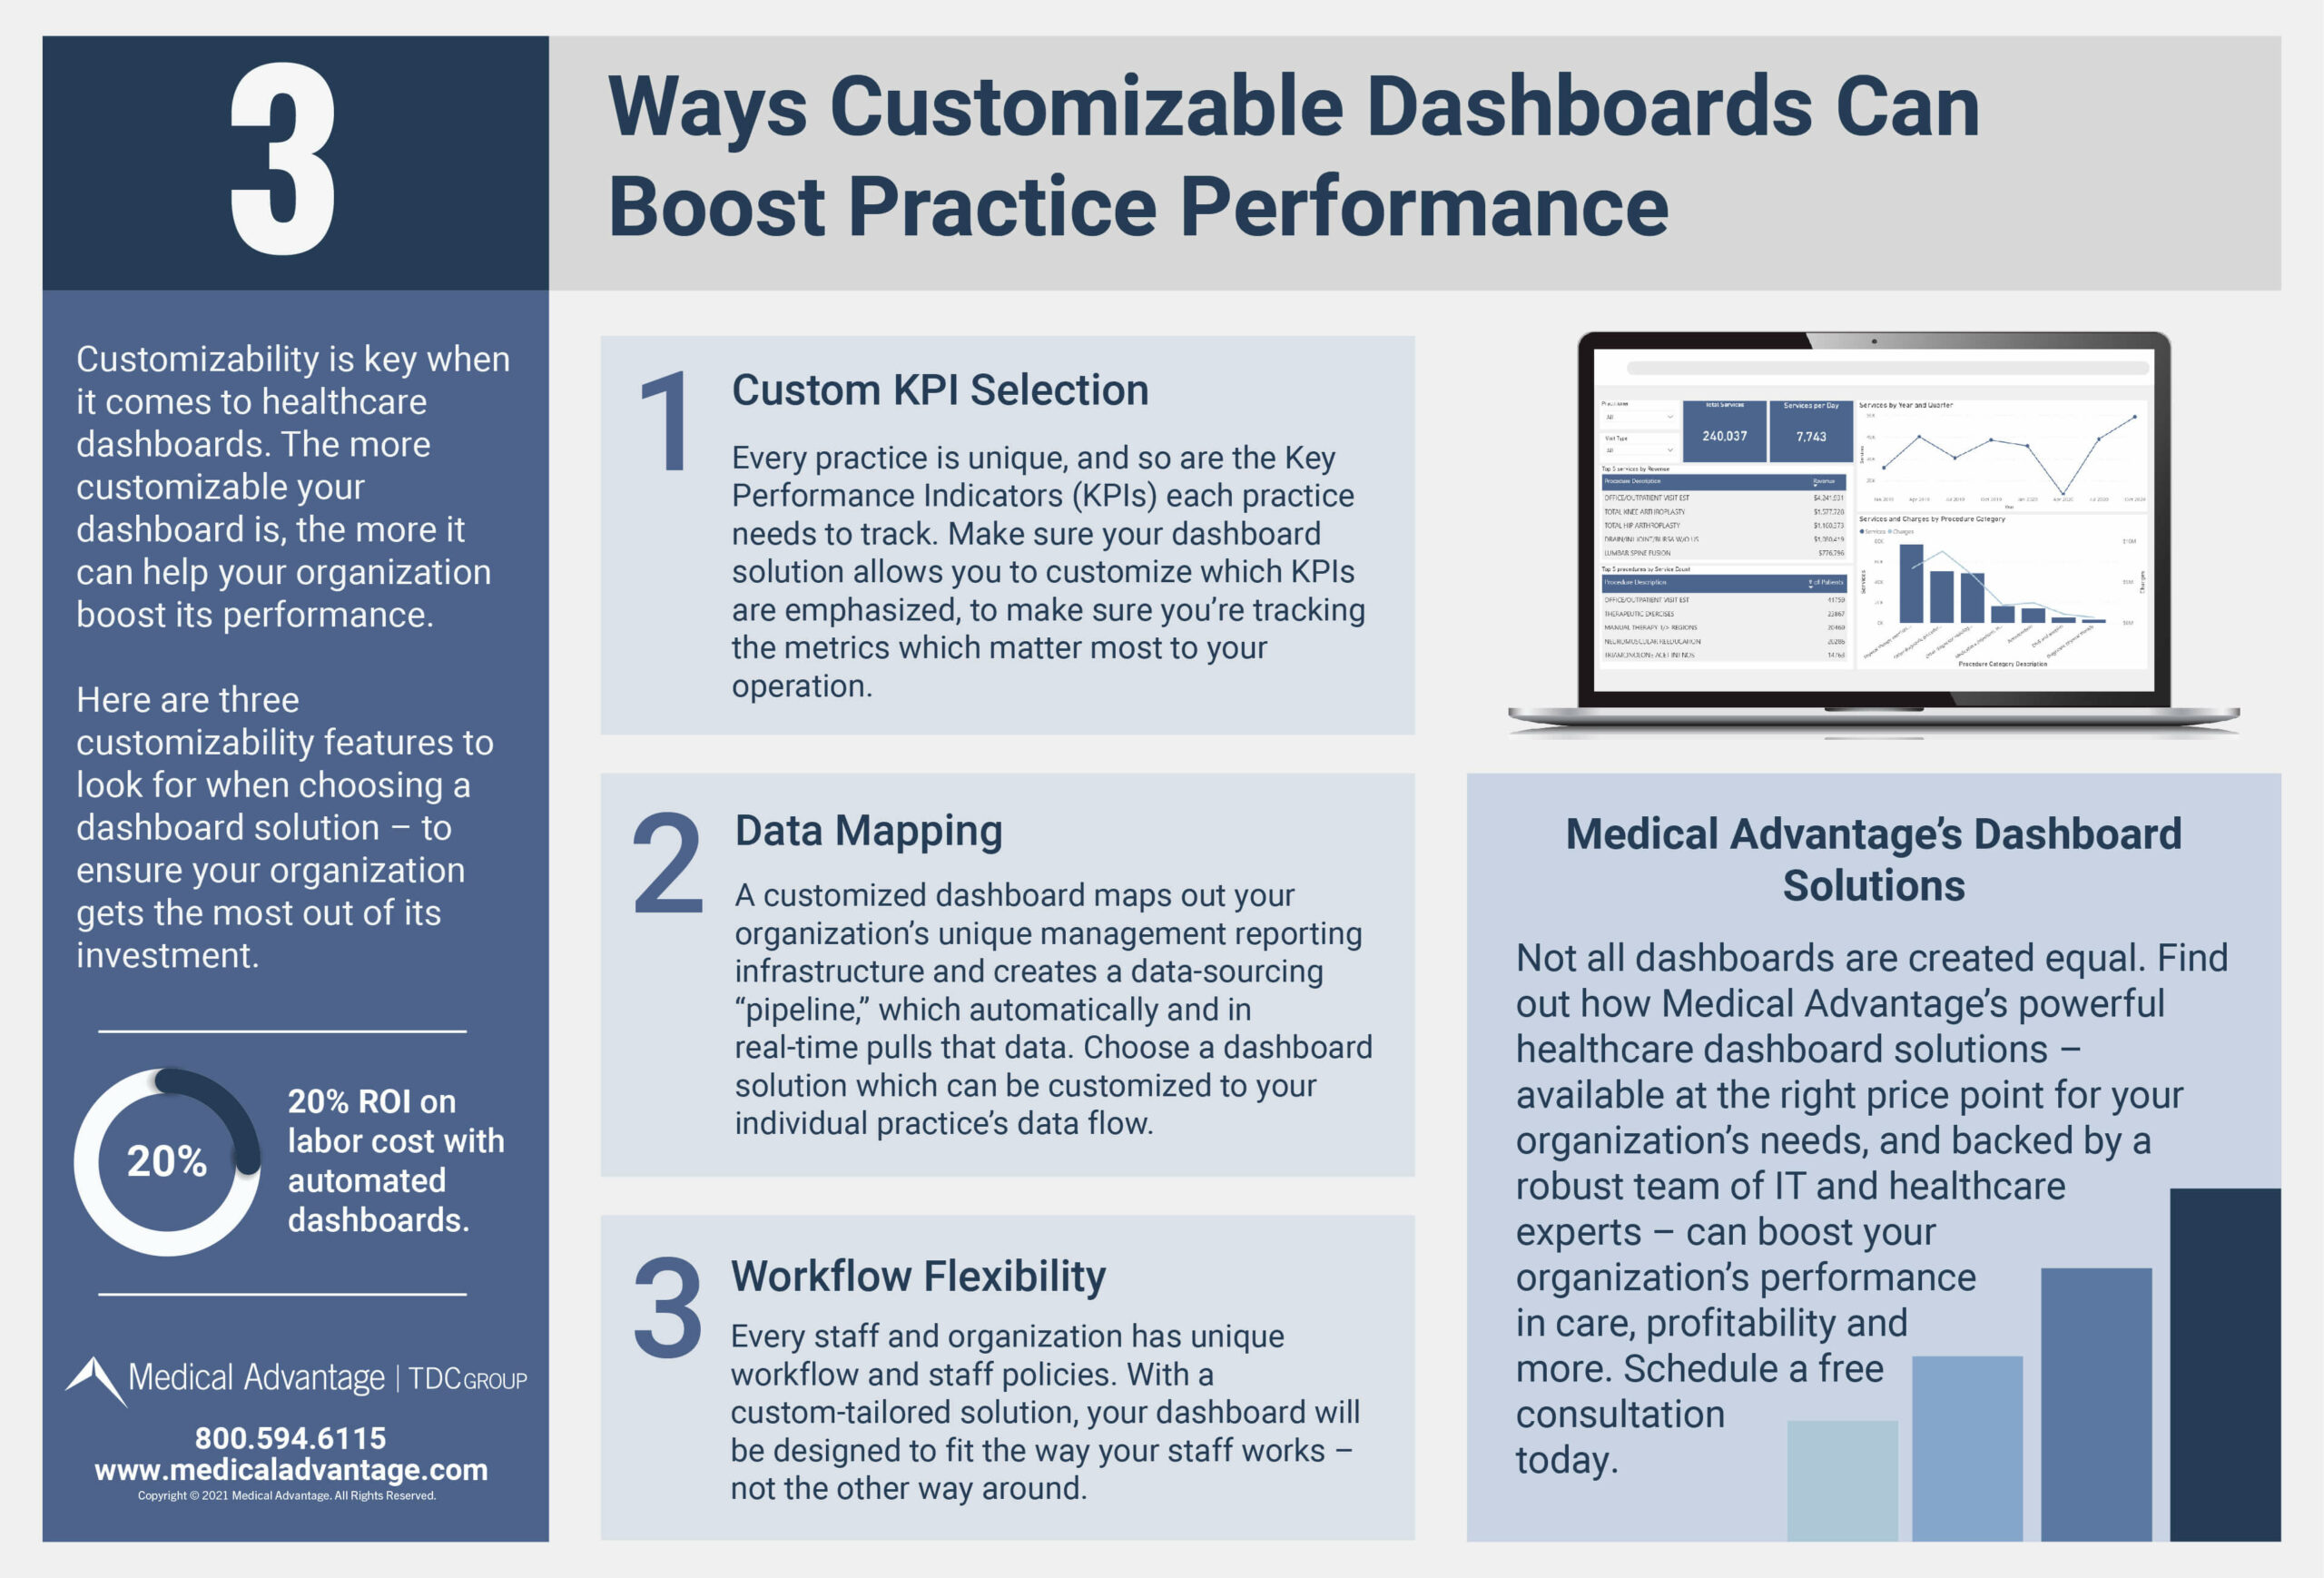 3 Ways Customizable Dashboards Can Boost Practice Performance